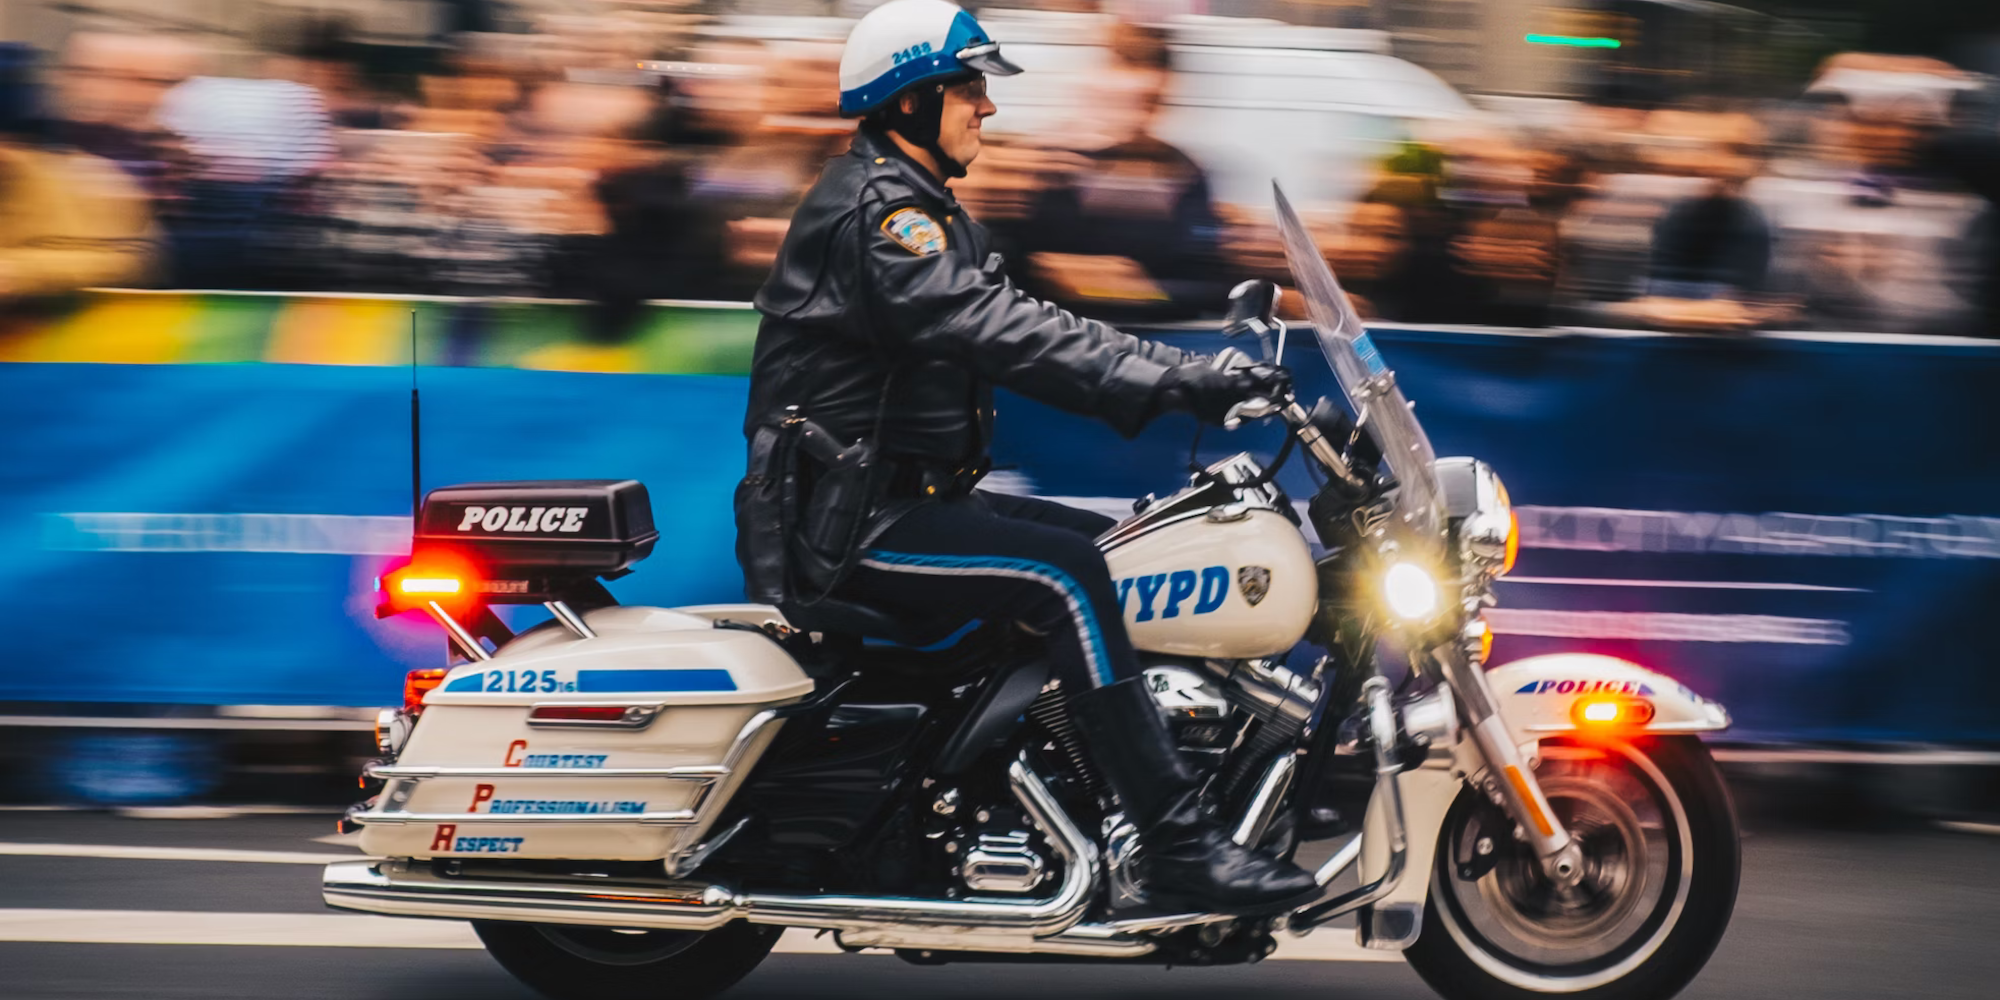 NYPD police motorcycle speeding against a blurred background